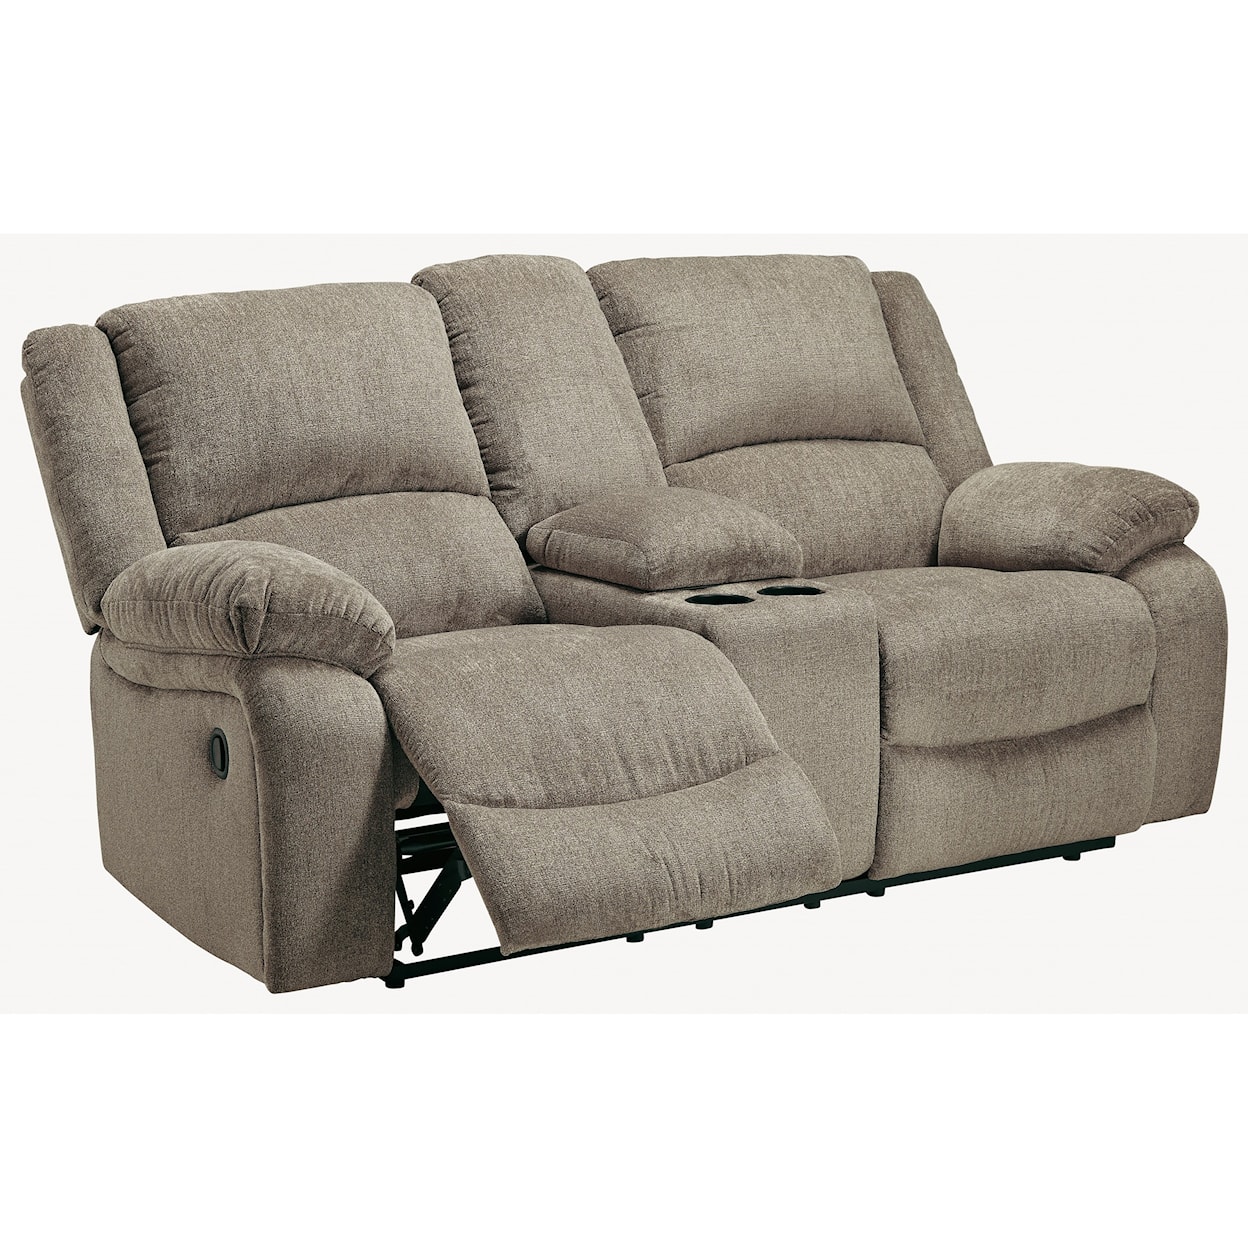 Signature Design by Ashley Draycoll Double Reclining Loveseat w/ Console